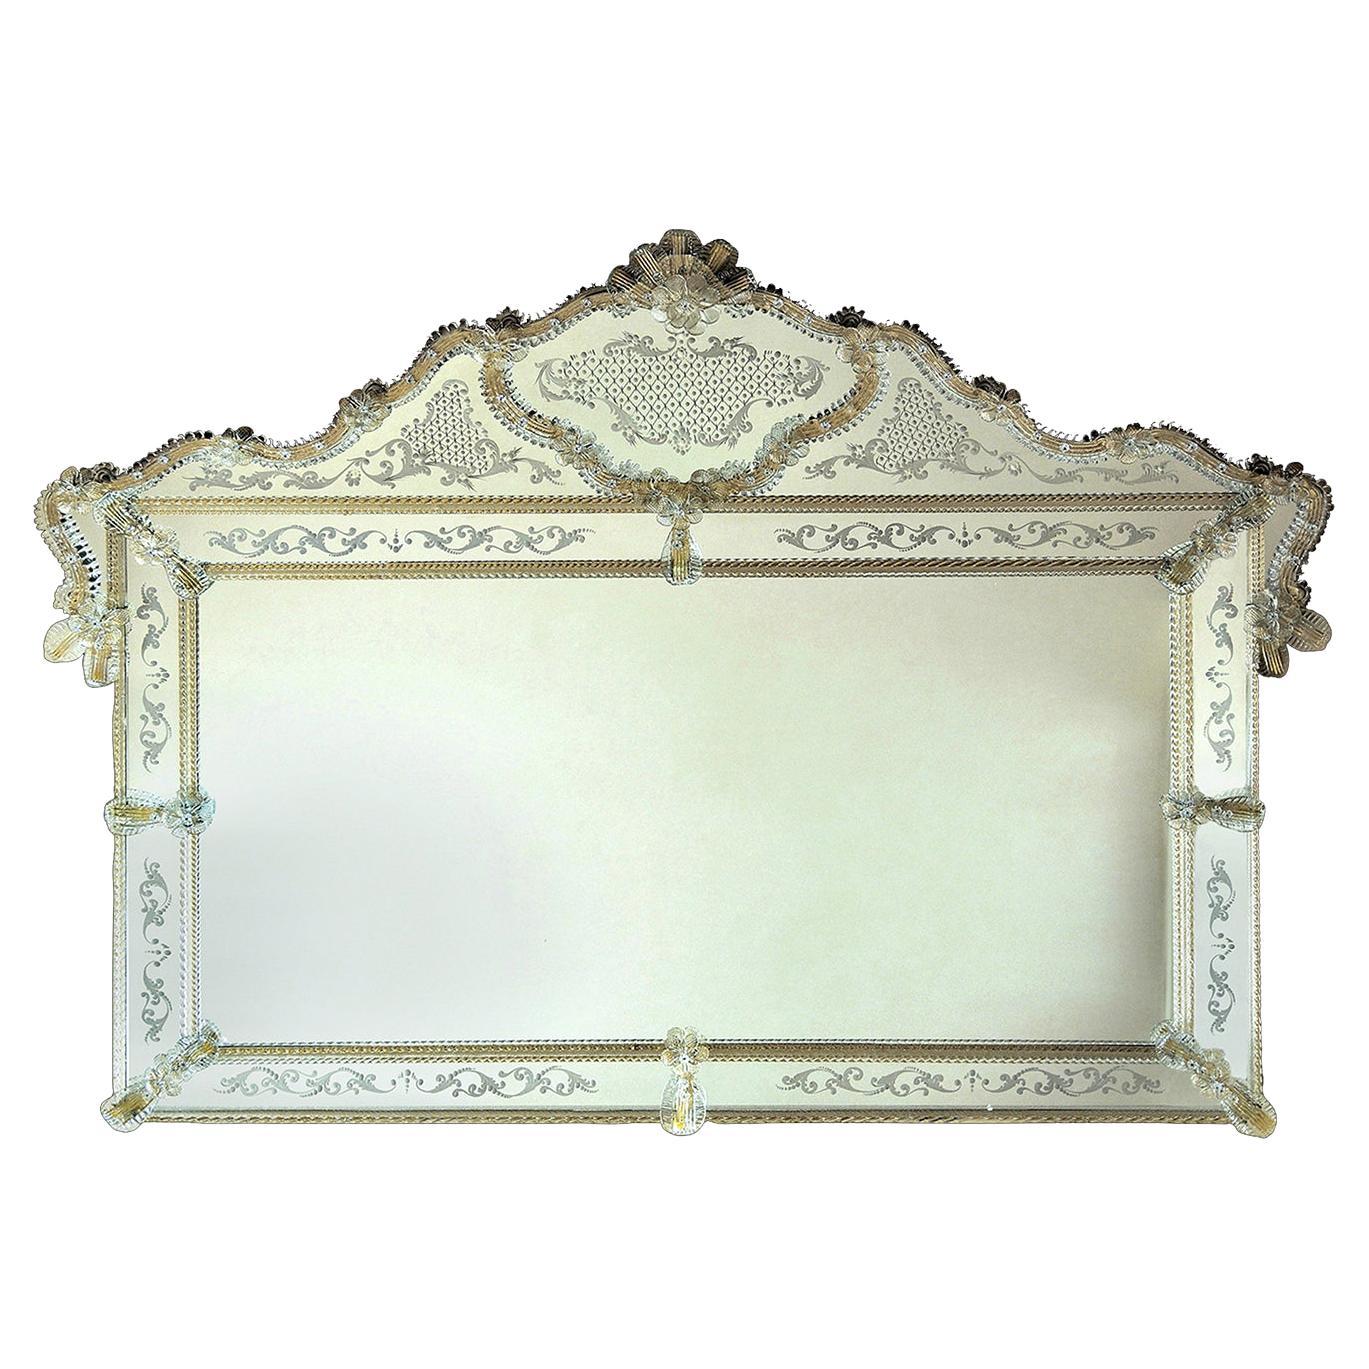 Tradision Wall Mirror For Sale